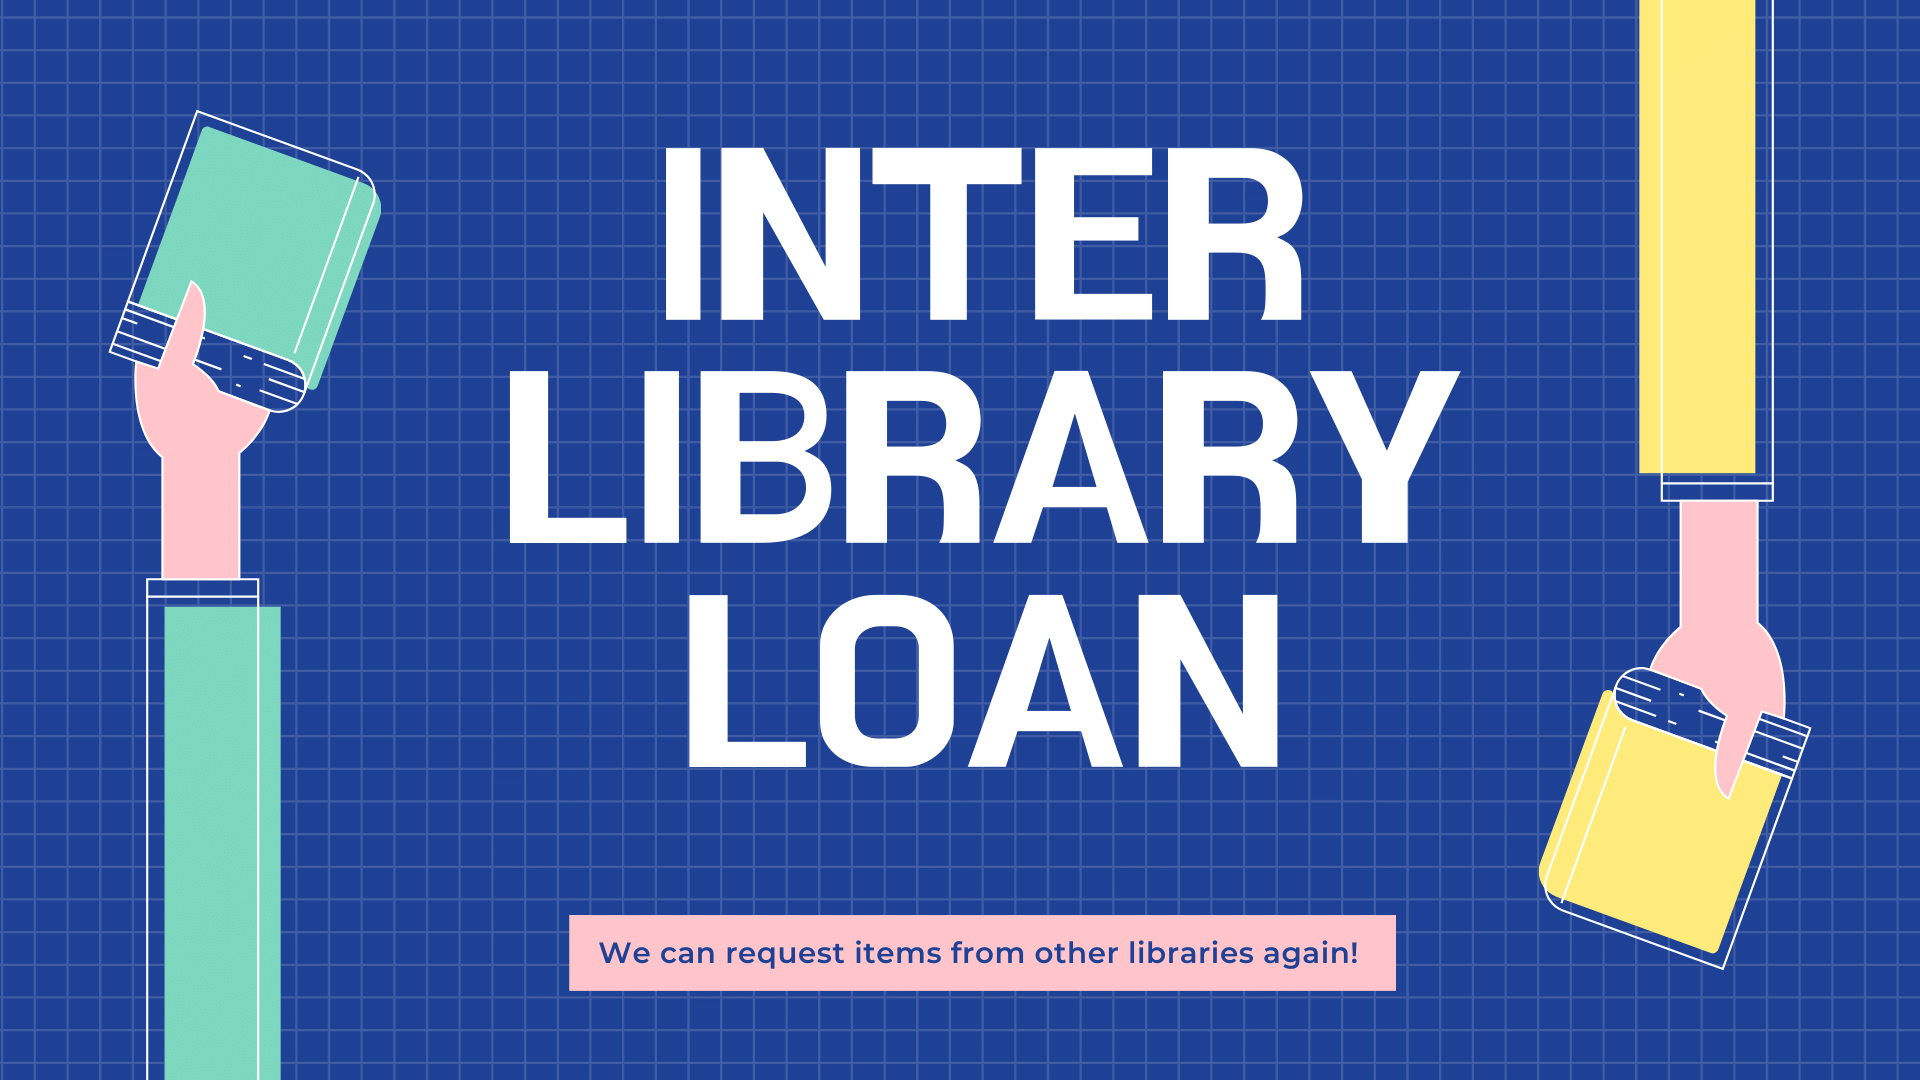 INter LIBRARY Loan_1.png